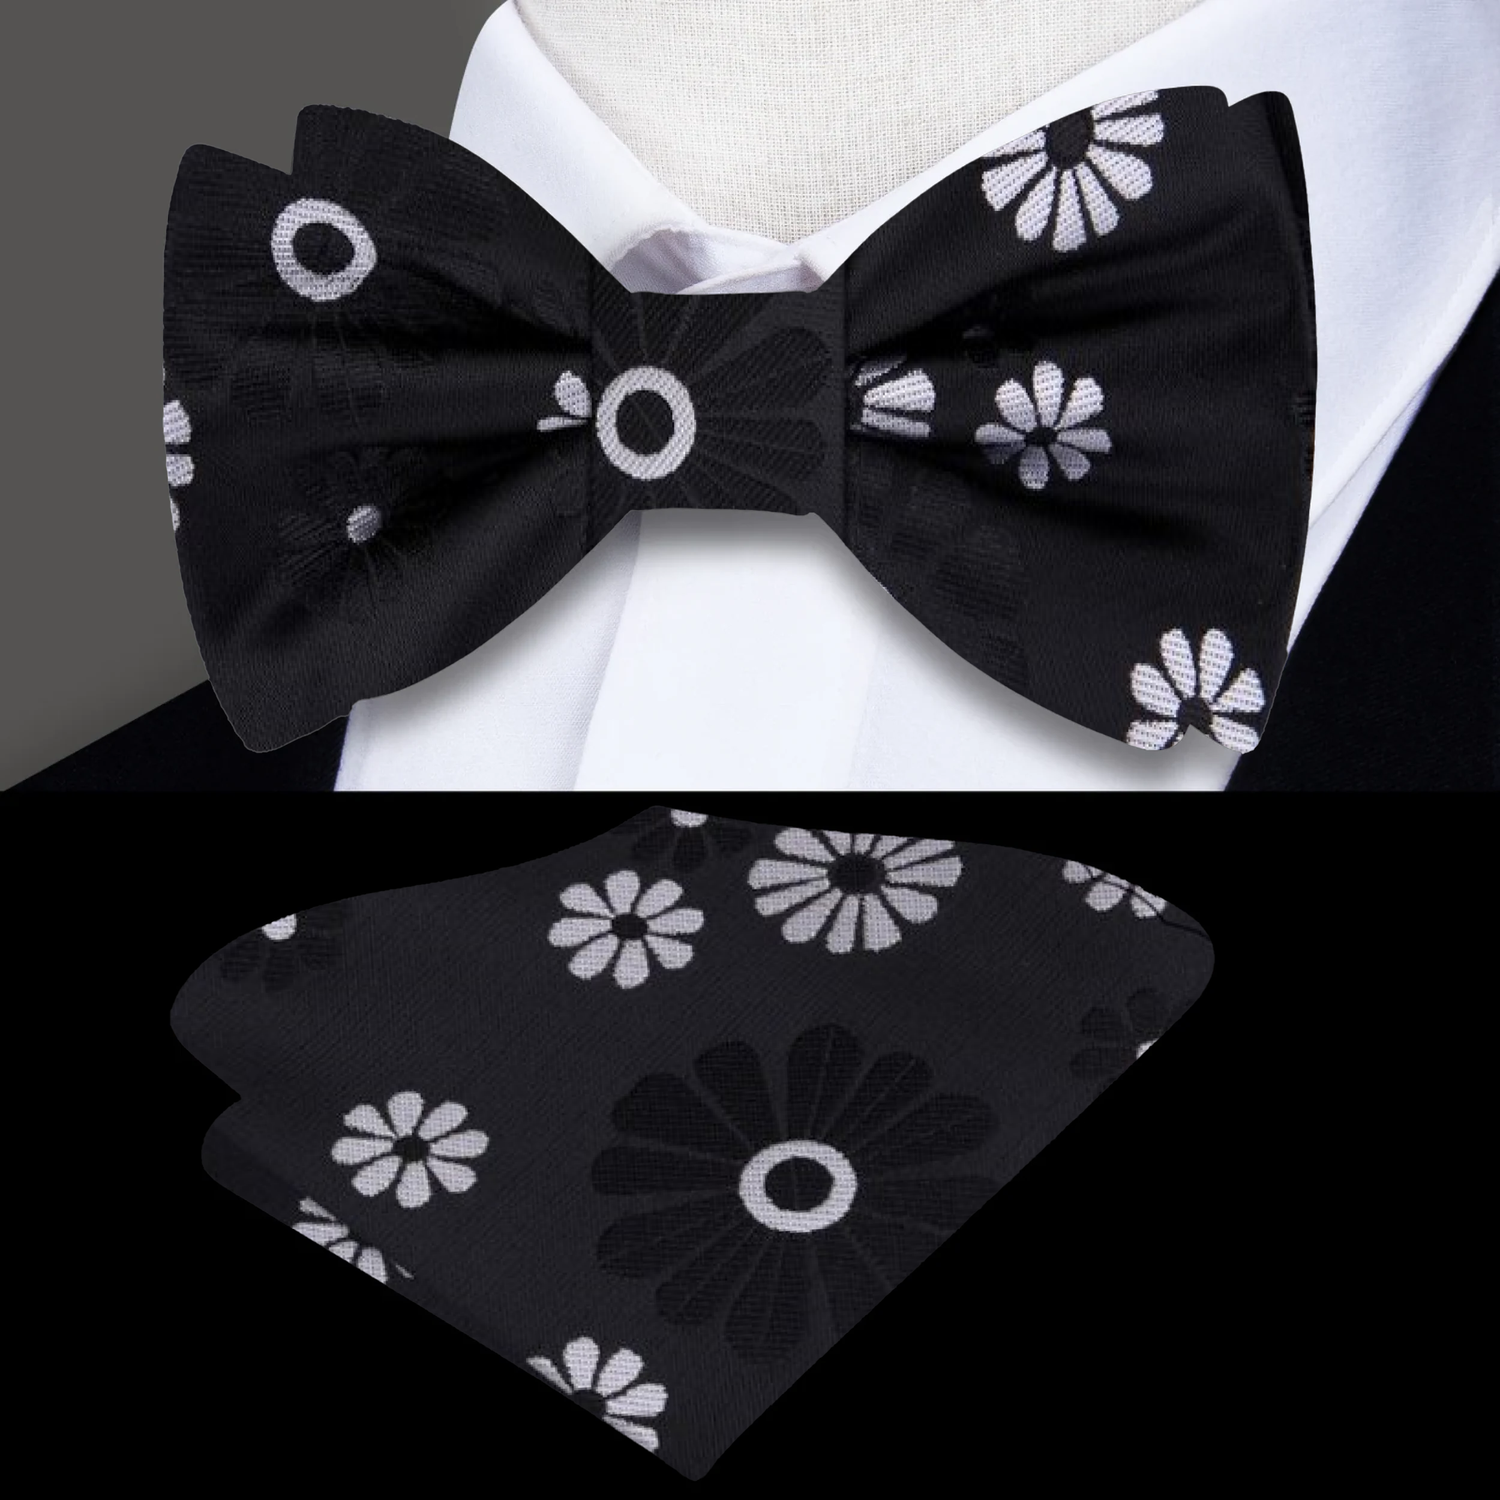 Black, Grey Cactus Flower Bow Tie and Square||Black, Grey